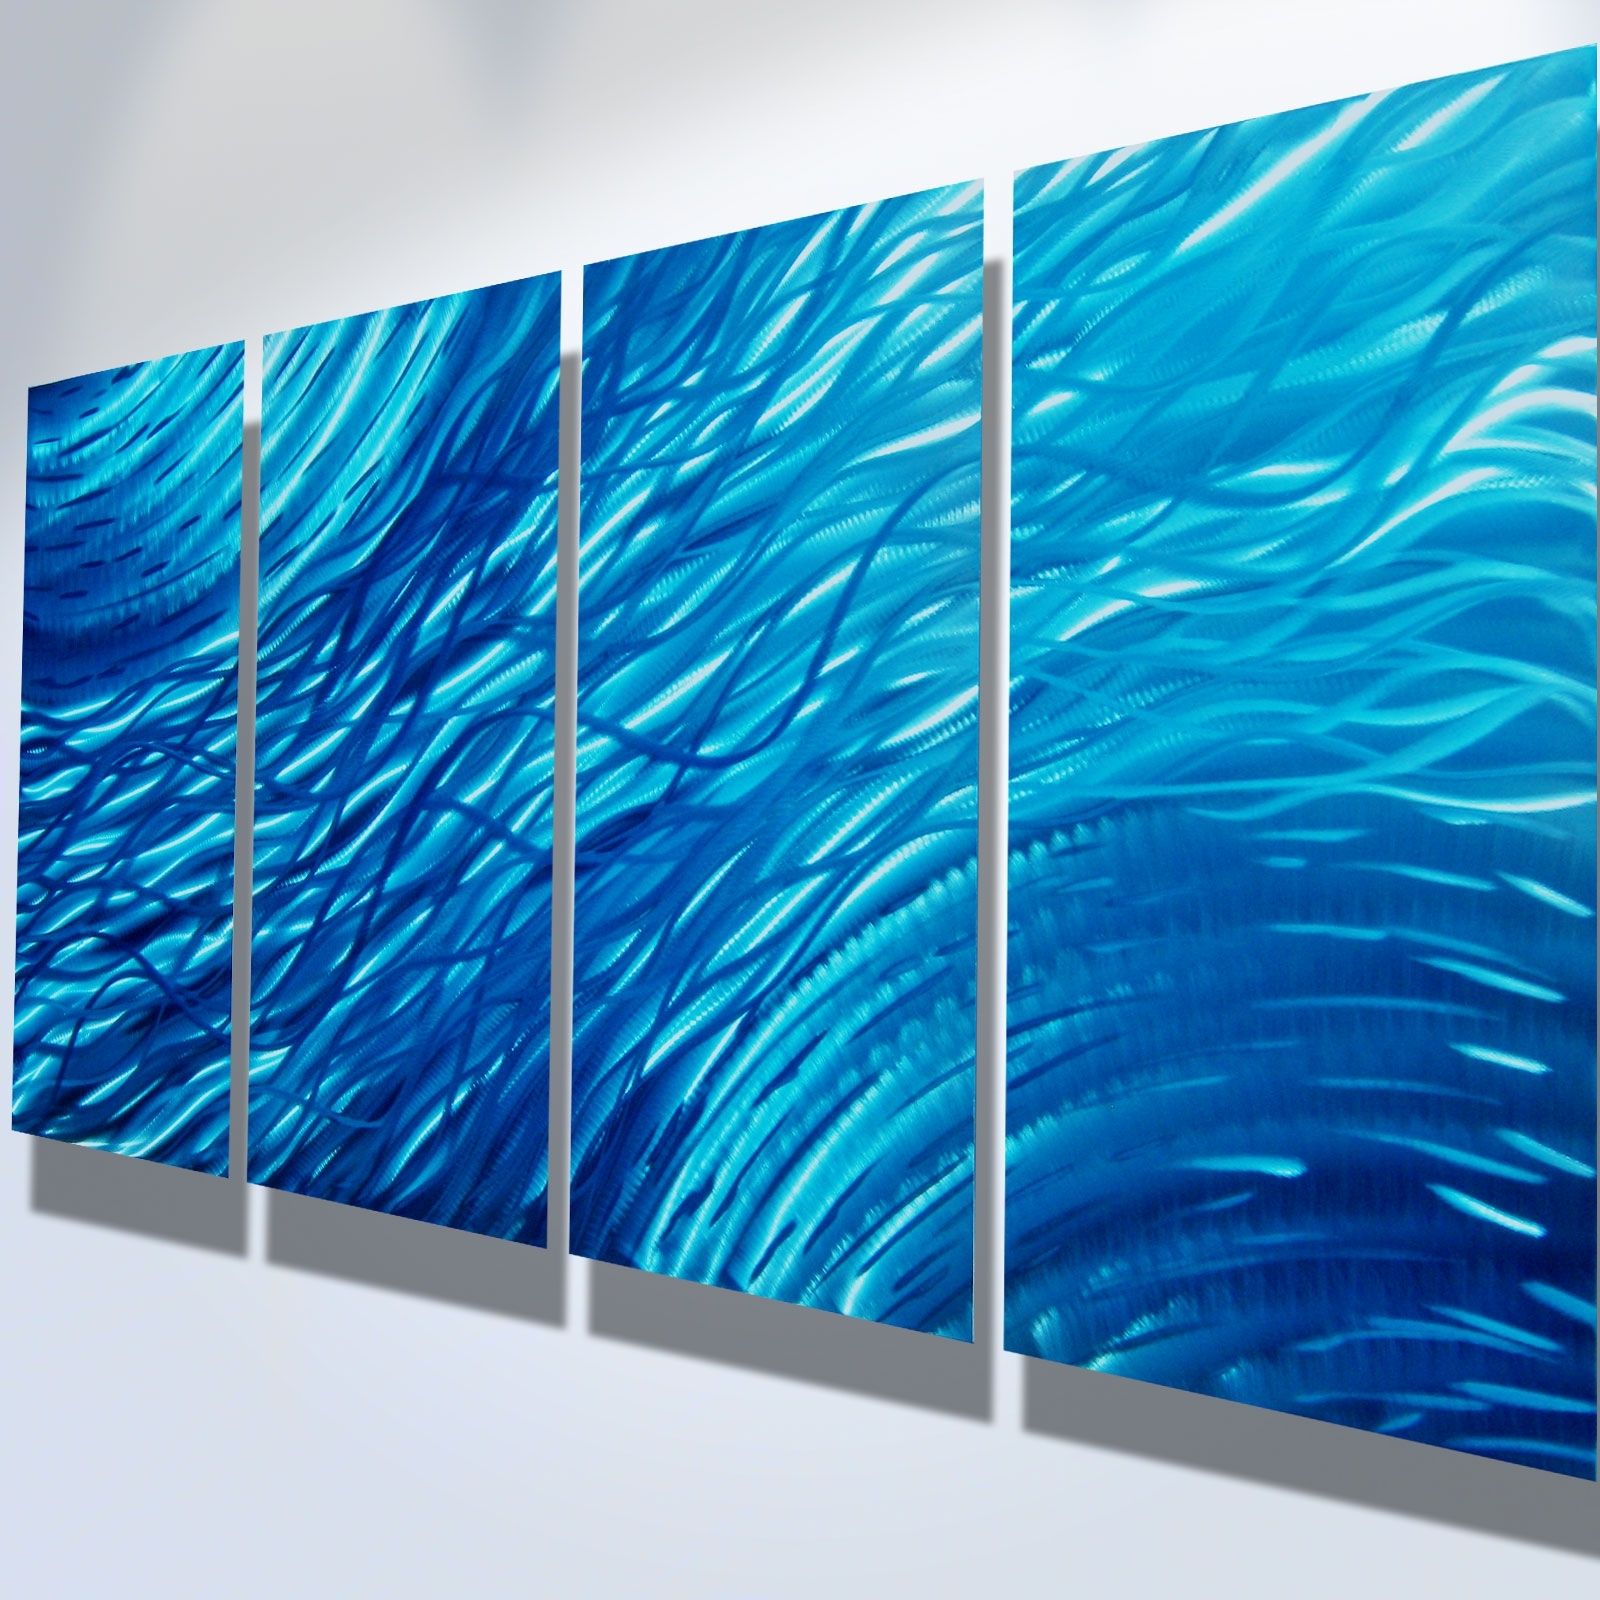 Ocean  Metal Wall Art Abstract Contemporary Modern Decor With Regard To Best And Newest Abstract Ocean Wall Art (Gallery 2 of 20)